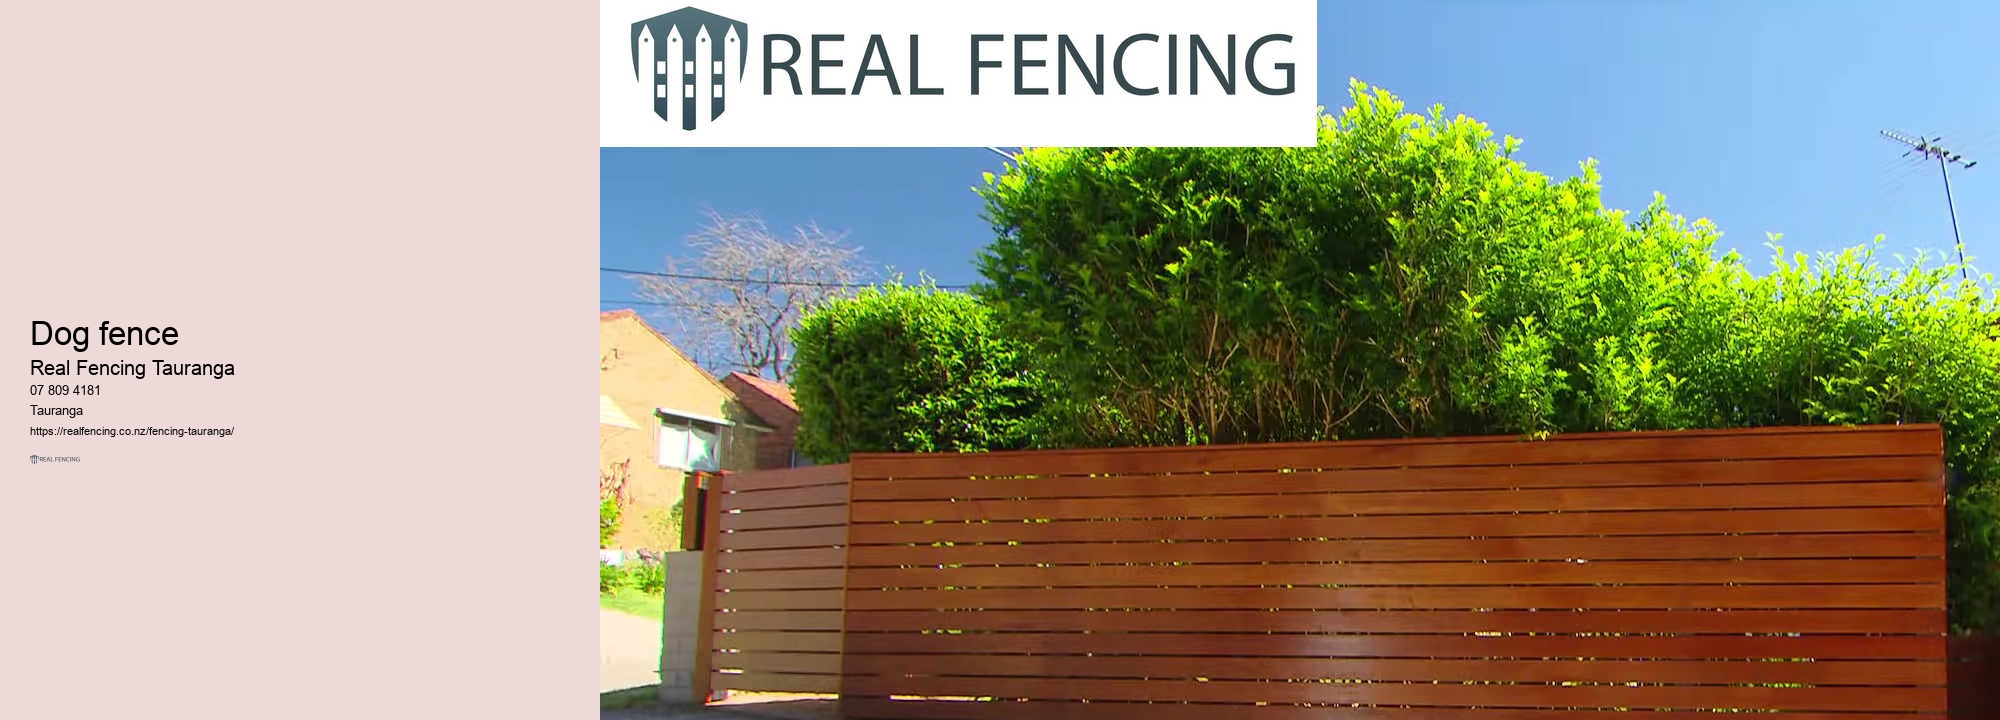 Commercial fence repair